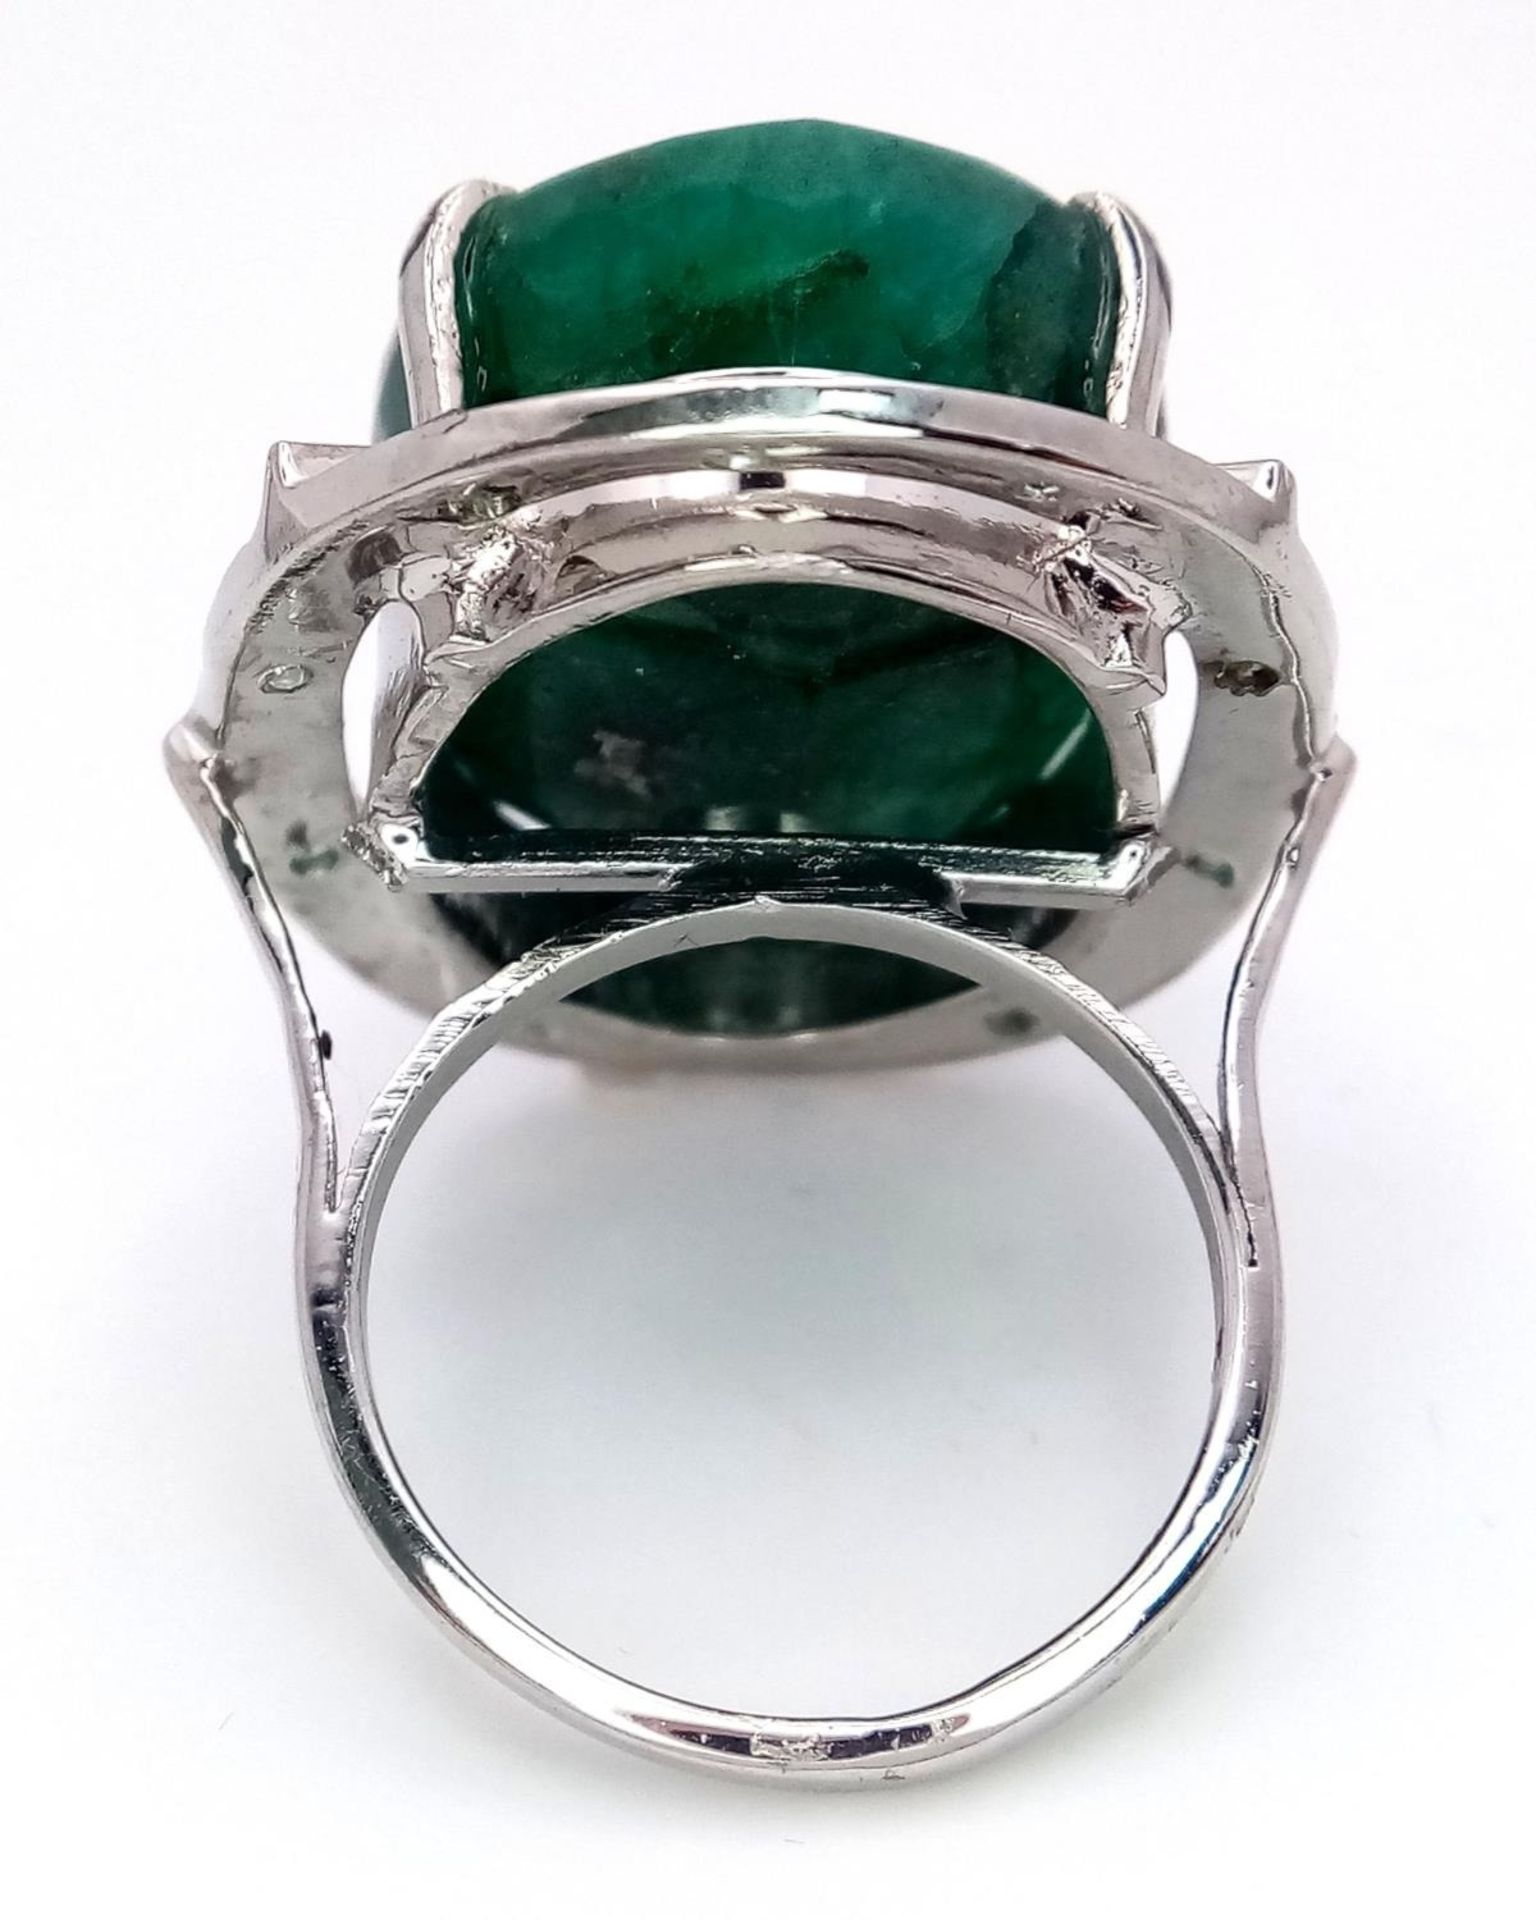 A 48ct Brazilian Emerald Silver Ring. Set in 925 Sterling Silver. W- 17.5g. Comes in a - Image 4 of 6